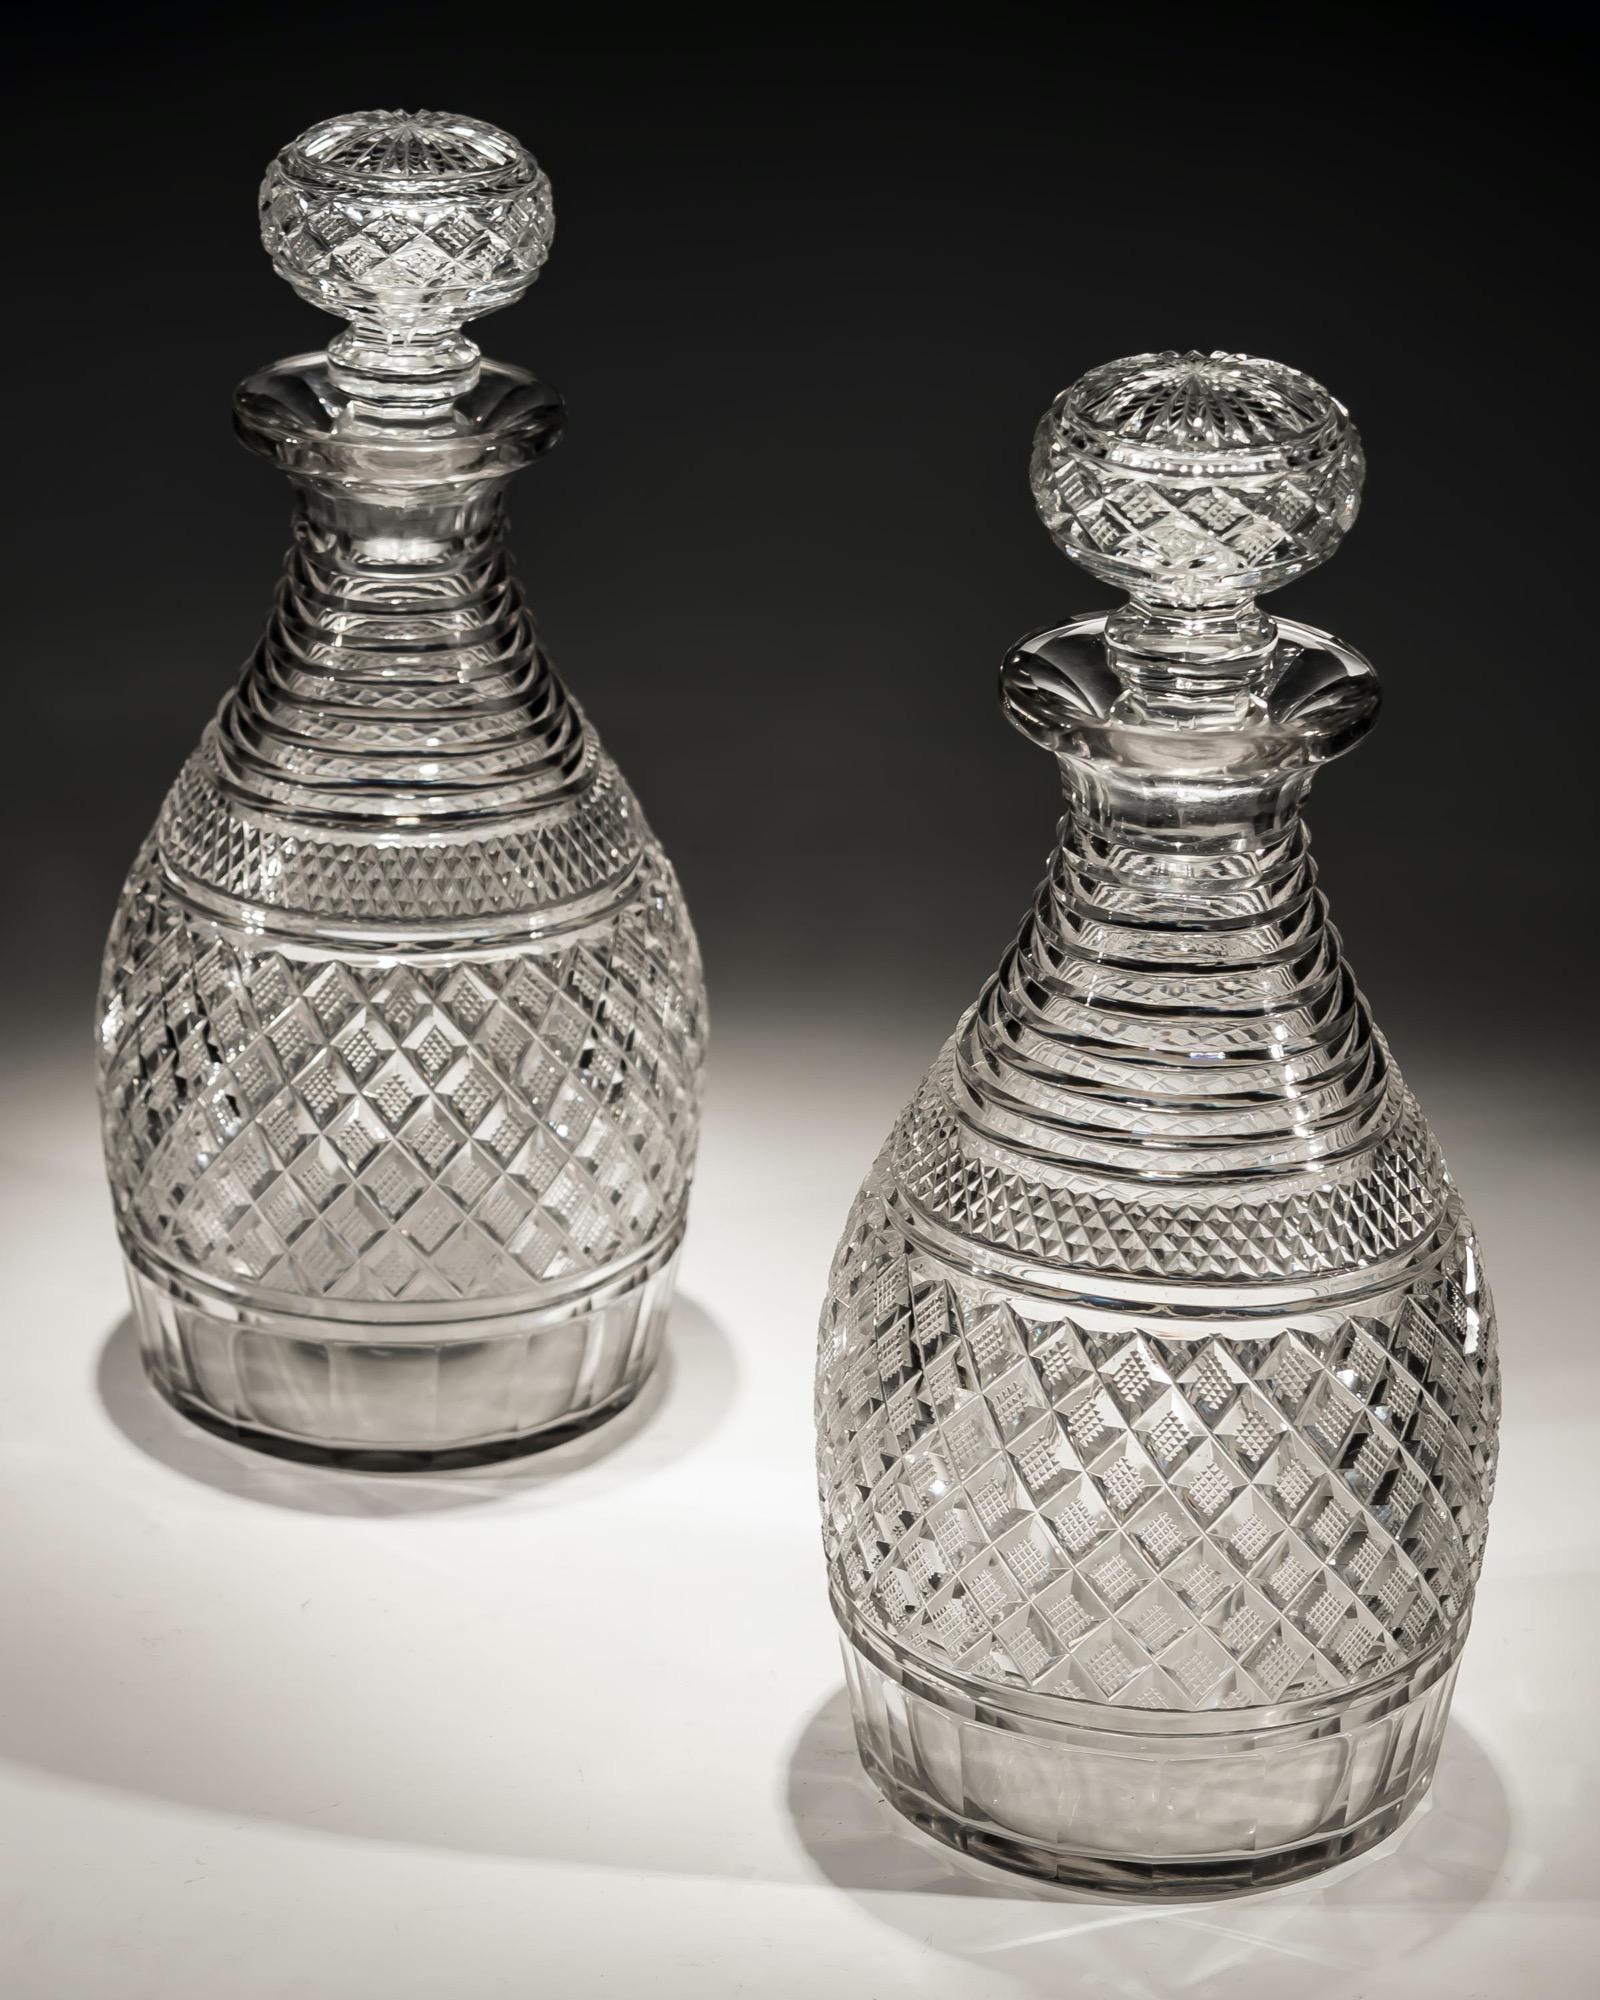 A pair of step and strawberry diamond cut Regency decanters.
Measures: Height 26 cm (10 1/4